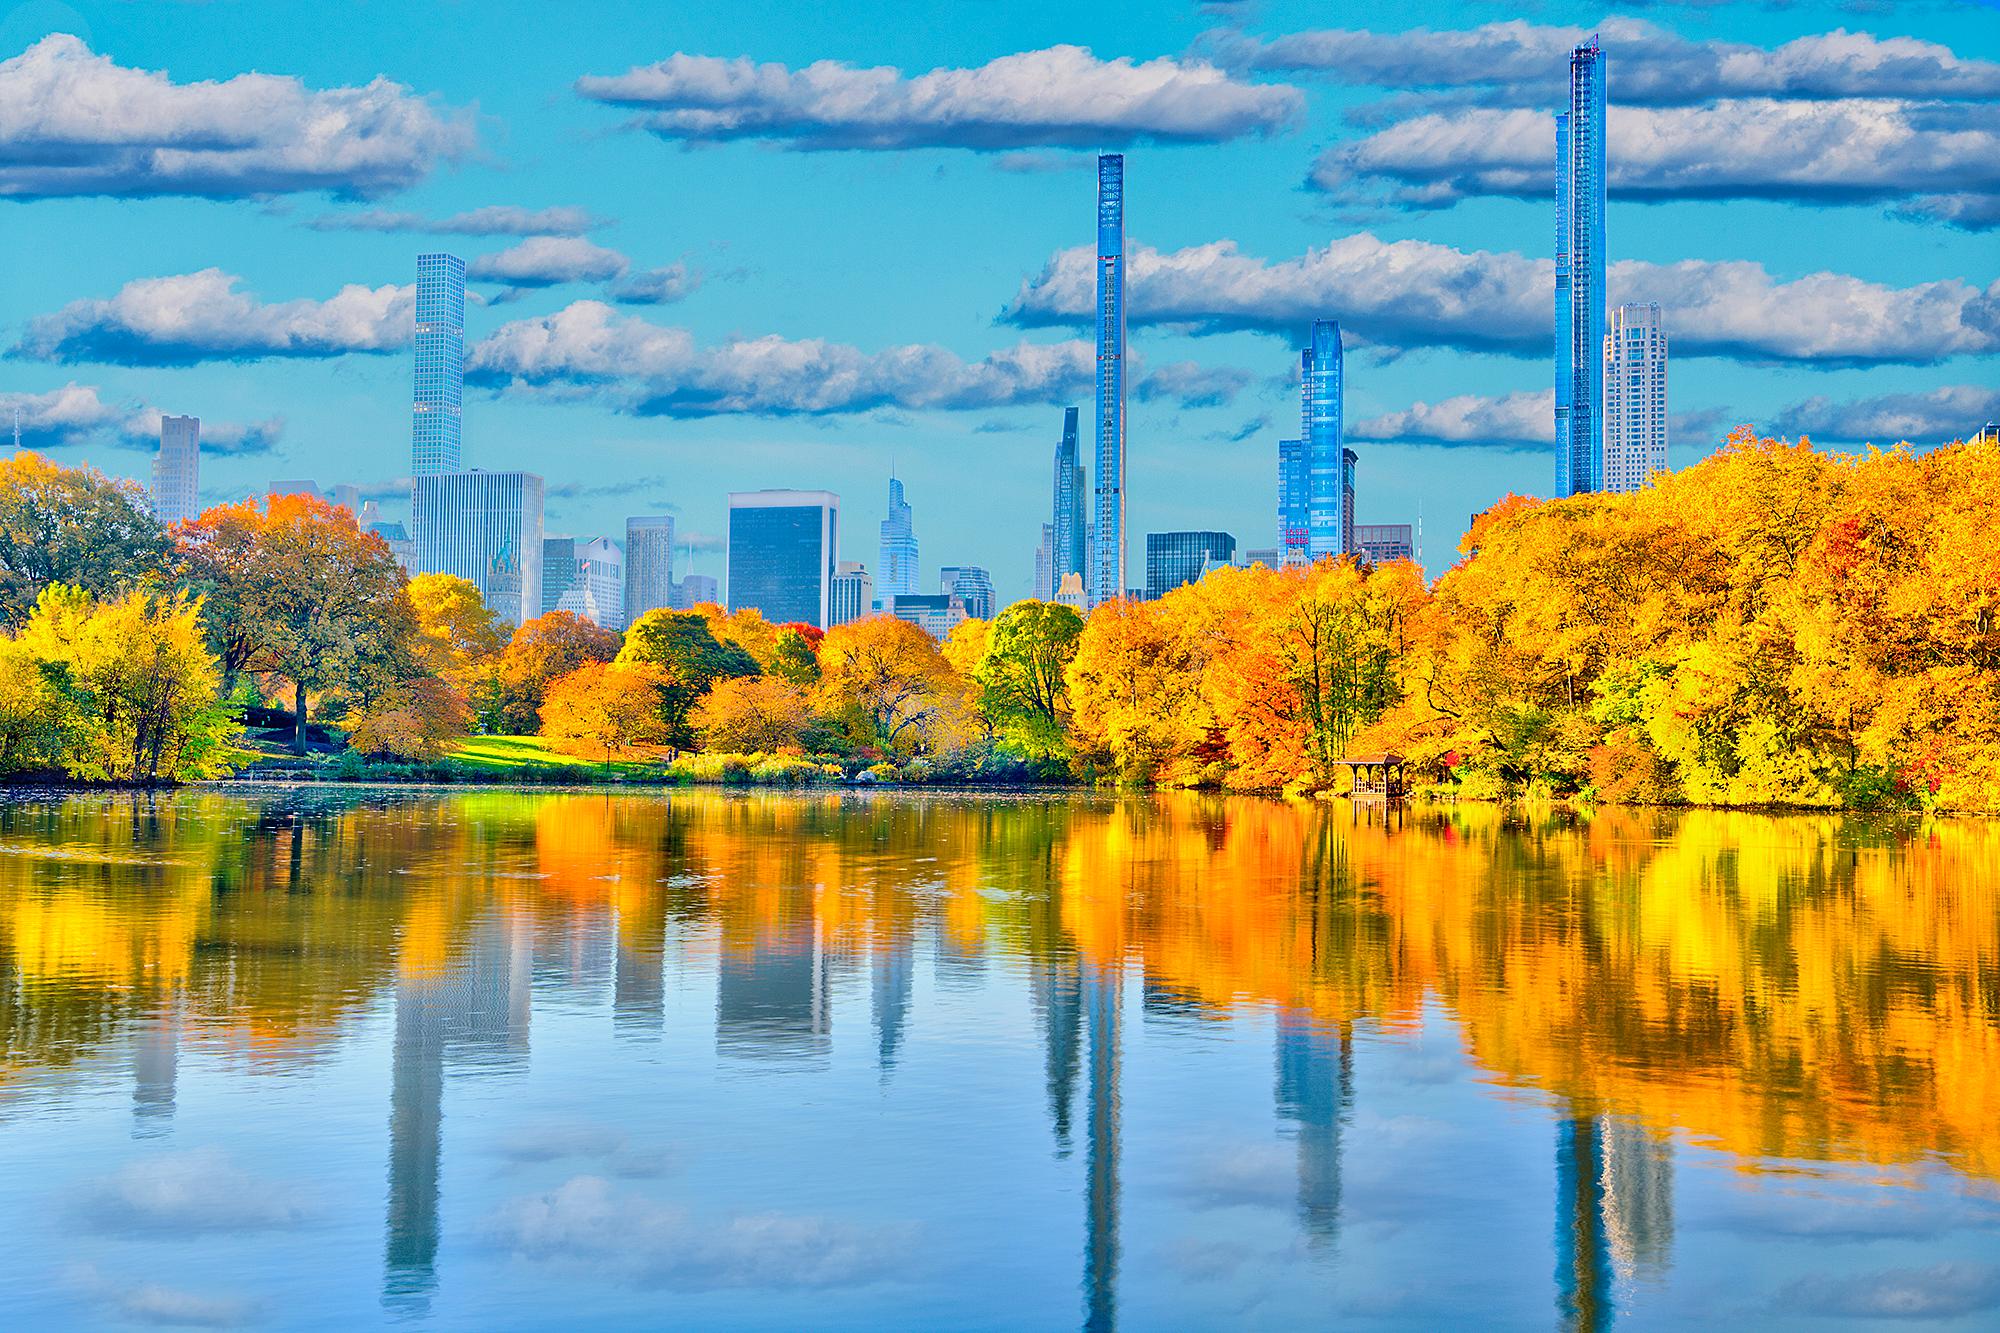 Billionaires' Row Manhattan from Central Park in Autumn colors  Heaven and Earth